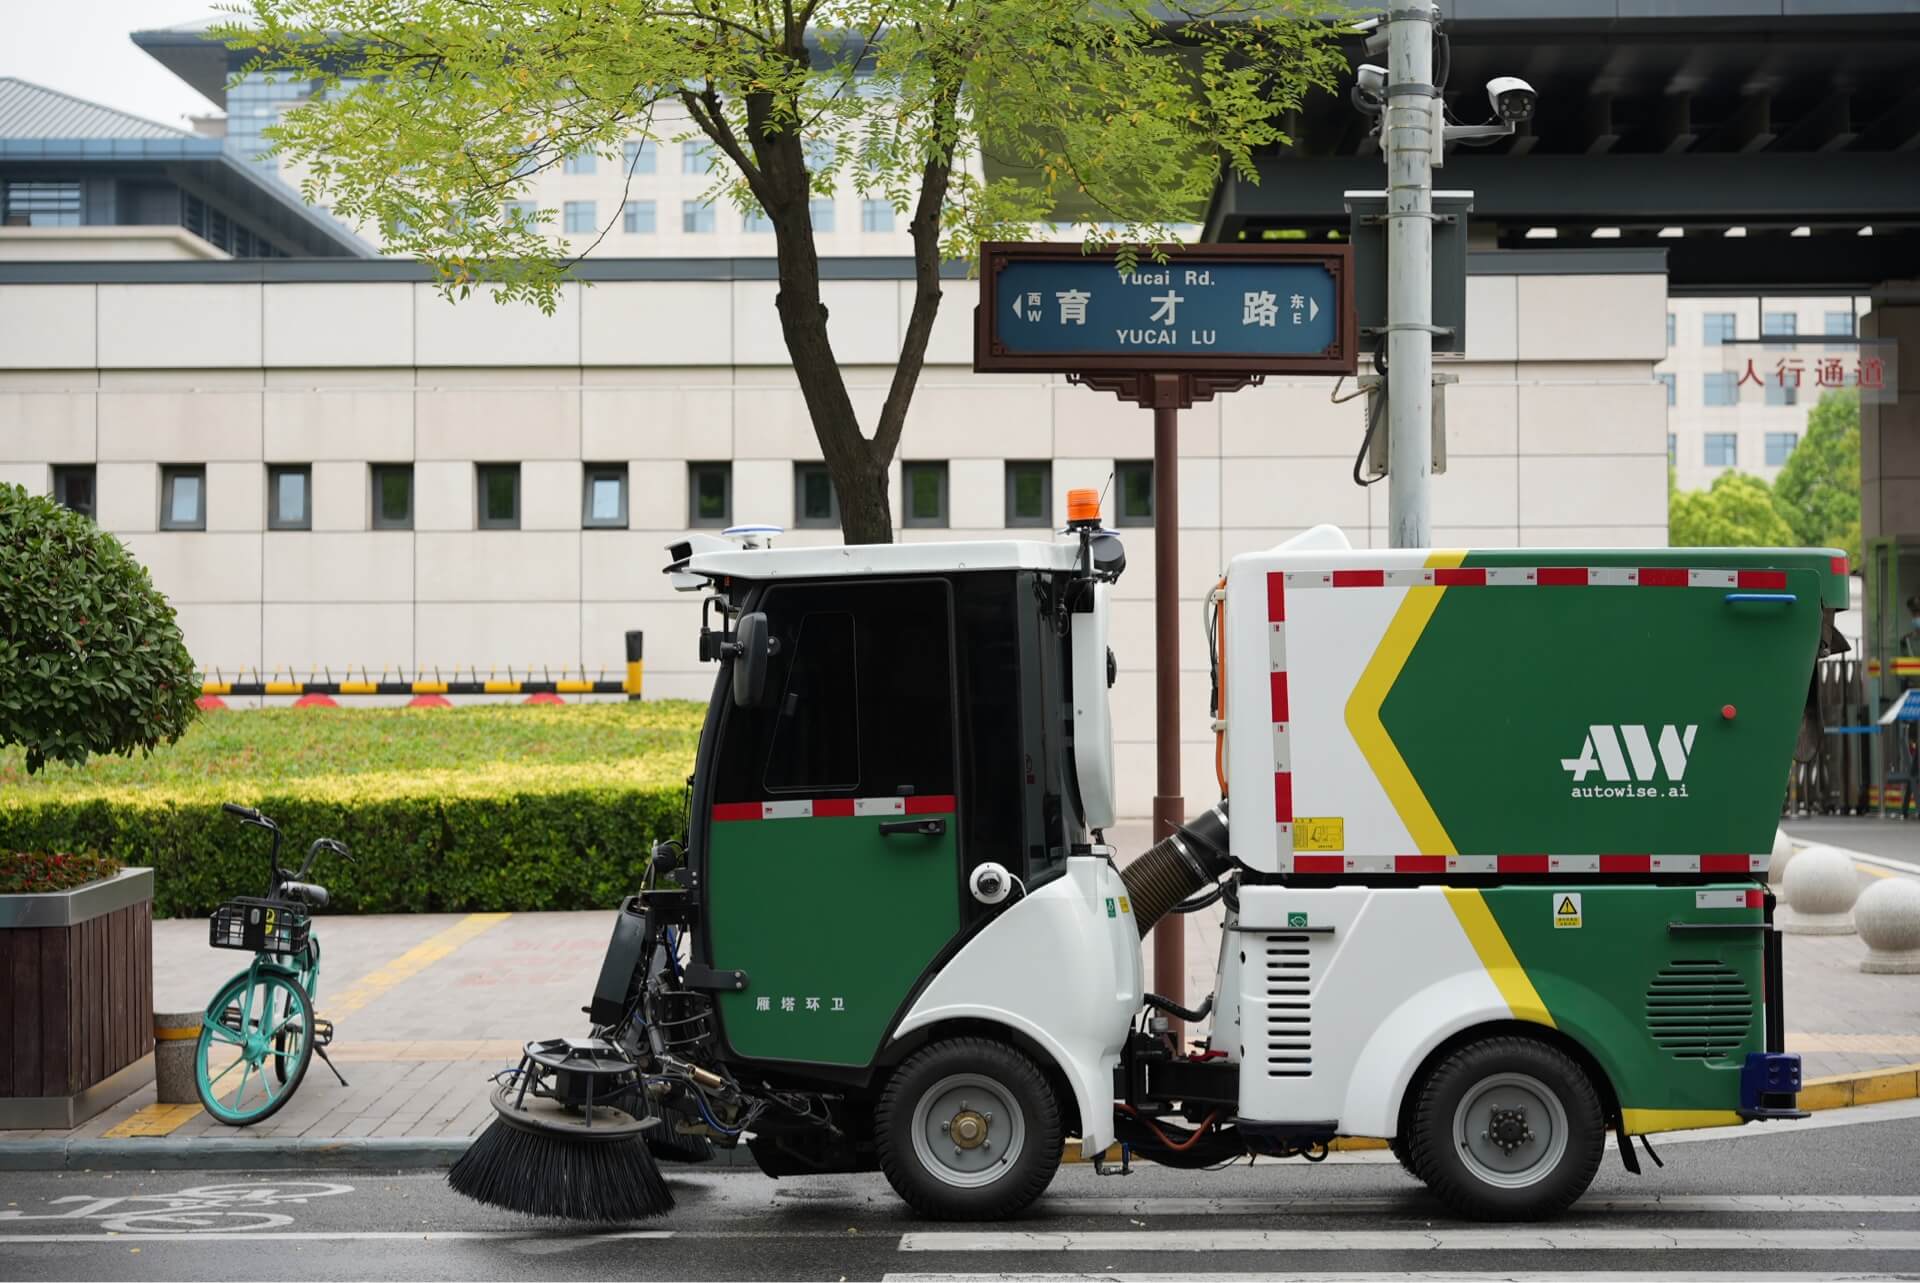 Autowise.ai V2 autonomous sweepers put into use in Xi’an